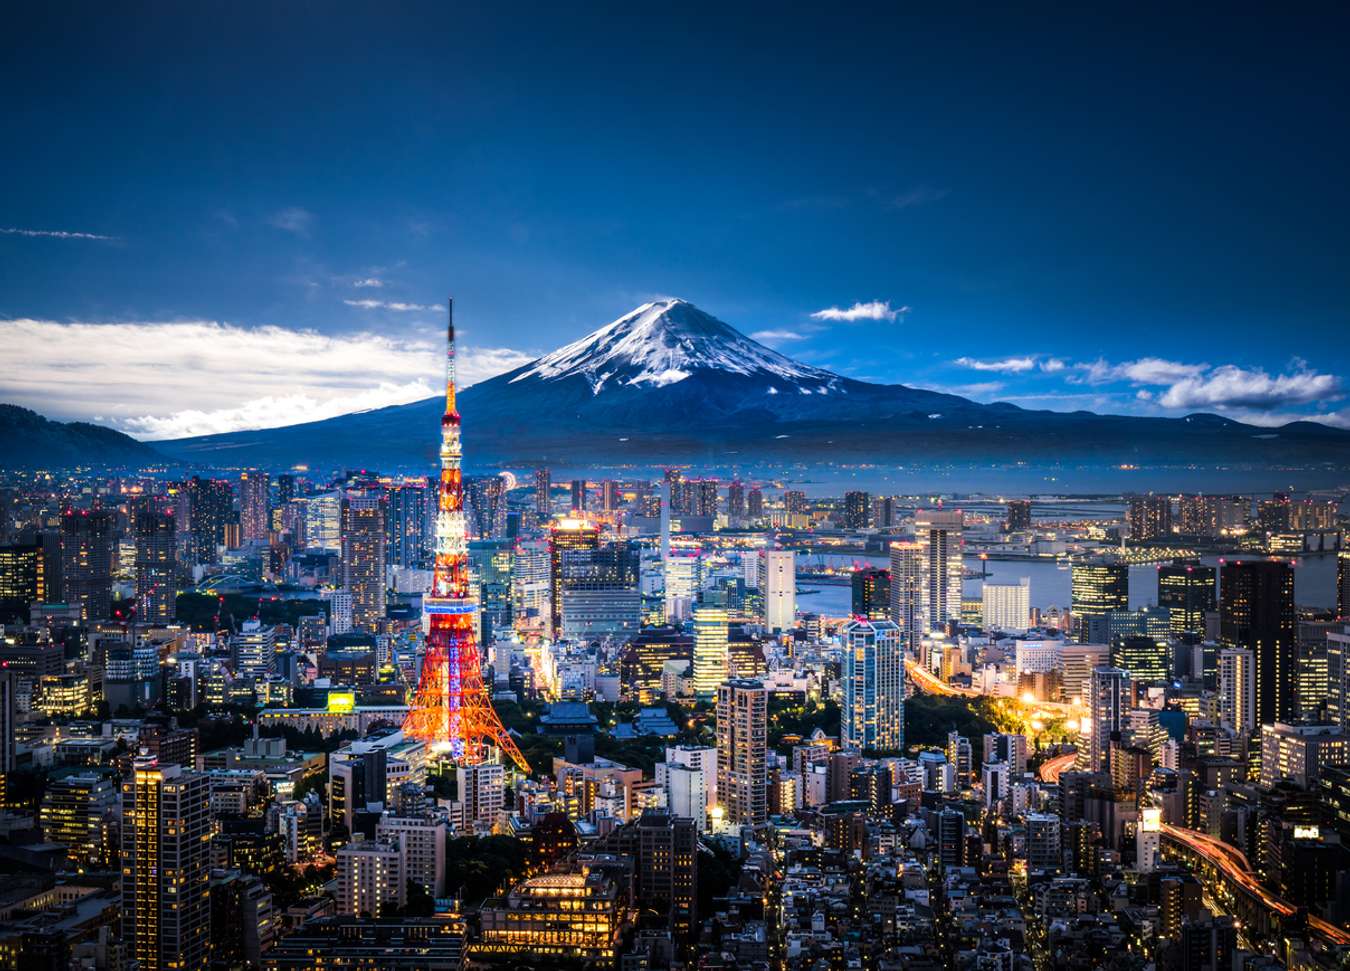 Aerial View Of Tokyo Cityscape With Fuji Mountain In Japan Stock Photo -  Download Image Now - iStock